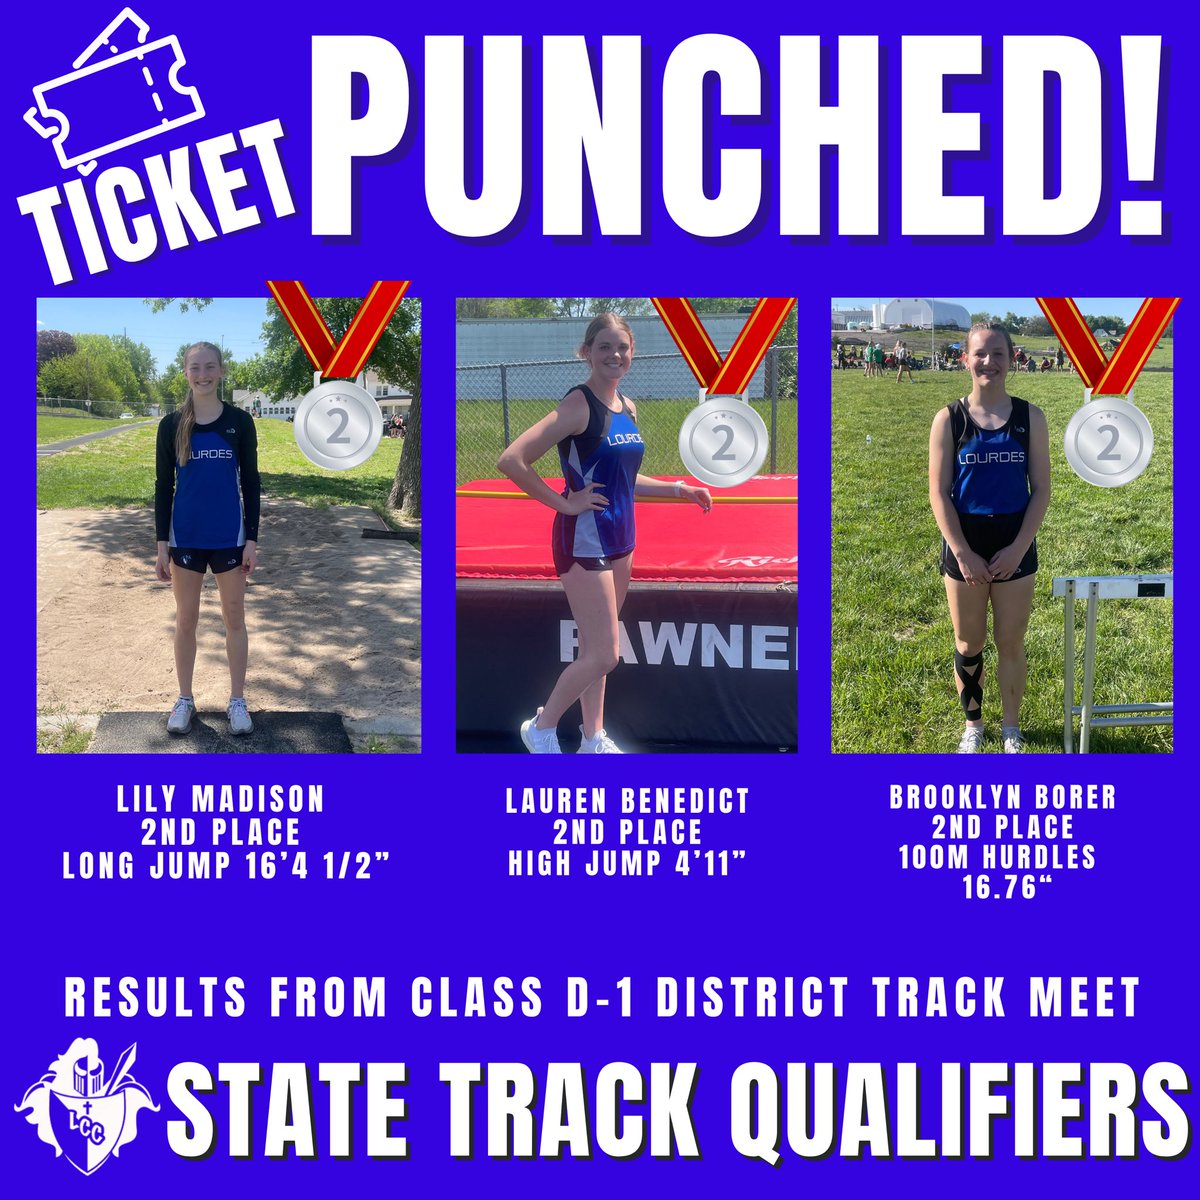 These Lady Knights PUNCHED their 🎟️TO STATE today! Congratulations! 🙌💙
🥈2nd Place: Lily Madison - Long Jump
🥈2nd Place: Lauren Benedict - High Jump
🥈2nd Place: Brooklyn Borer - 100m Hurdles
#knightpride